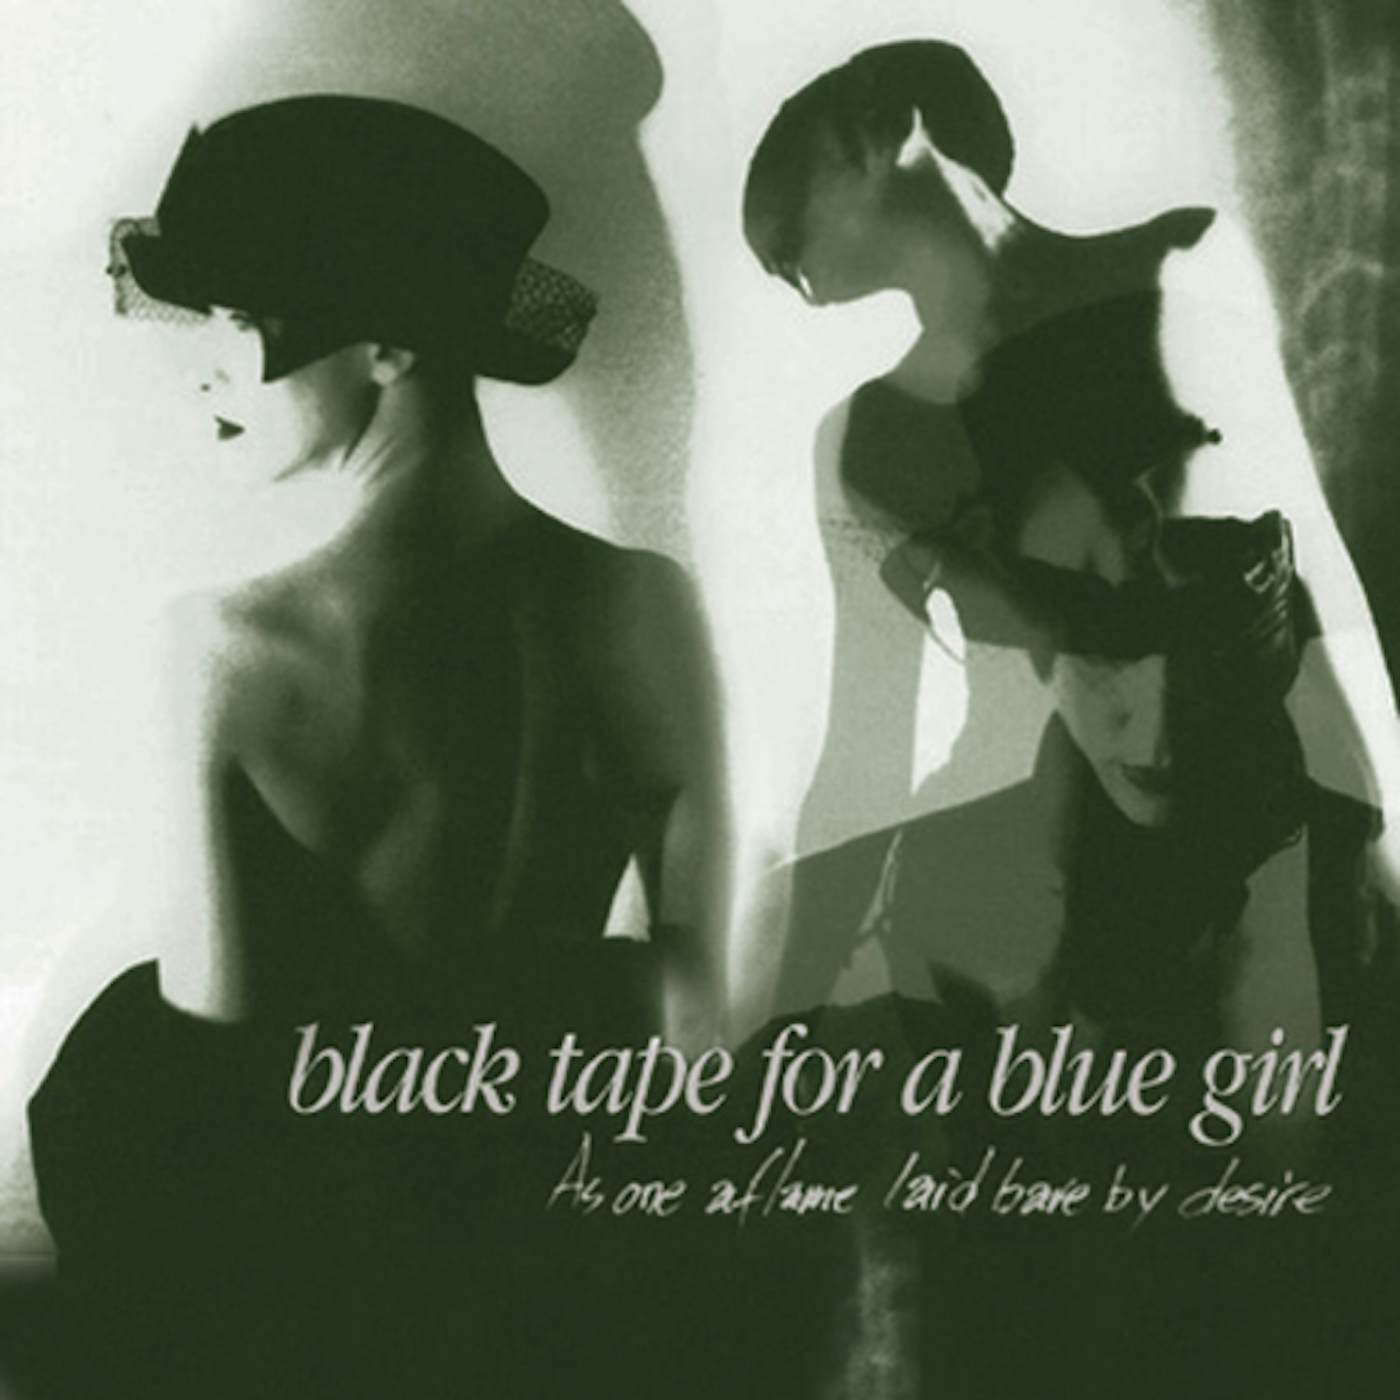 Black Tape For A Blue Girl AS ONE AFLAME LAID BARE BY DESIRE CD